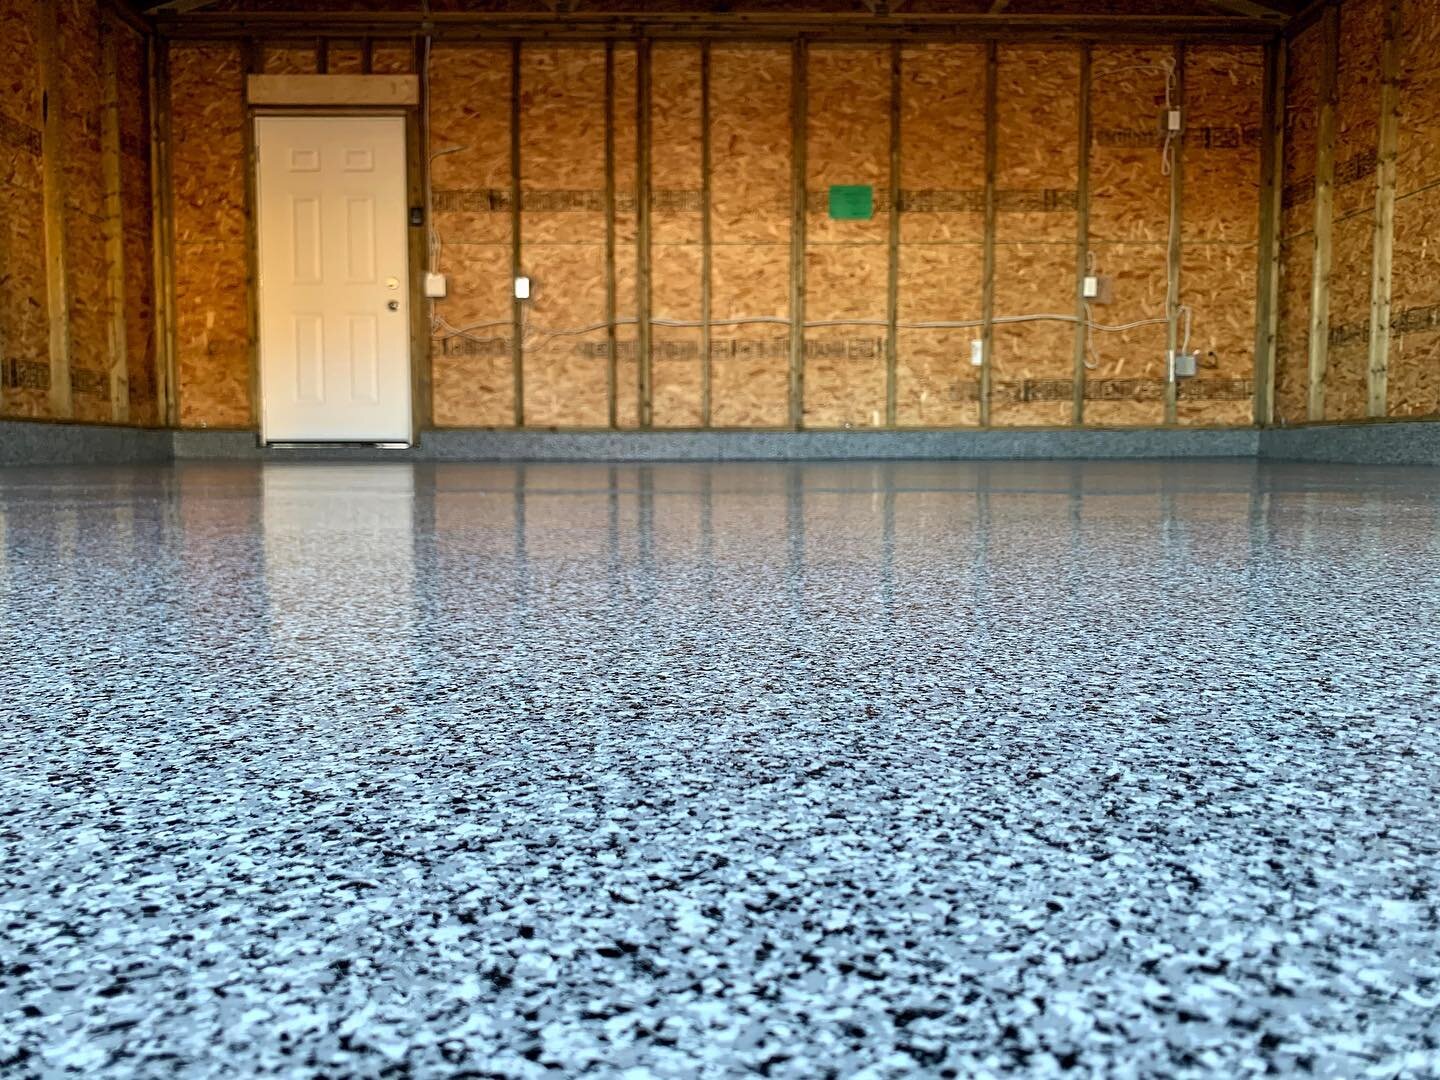 Our shadow flake w/ Polyaspartic topcoat on this new garage build. Couldn&rsquo;t ask for a better job to wrap up the week!  #canuckcoatings #concrete #epoxy #epoxyresin #epoxyart #epoxyfloor #polyaspartic #polyasparticcoatings #epoxyflooring #epoxyl